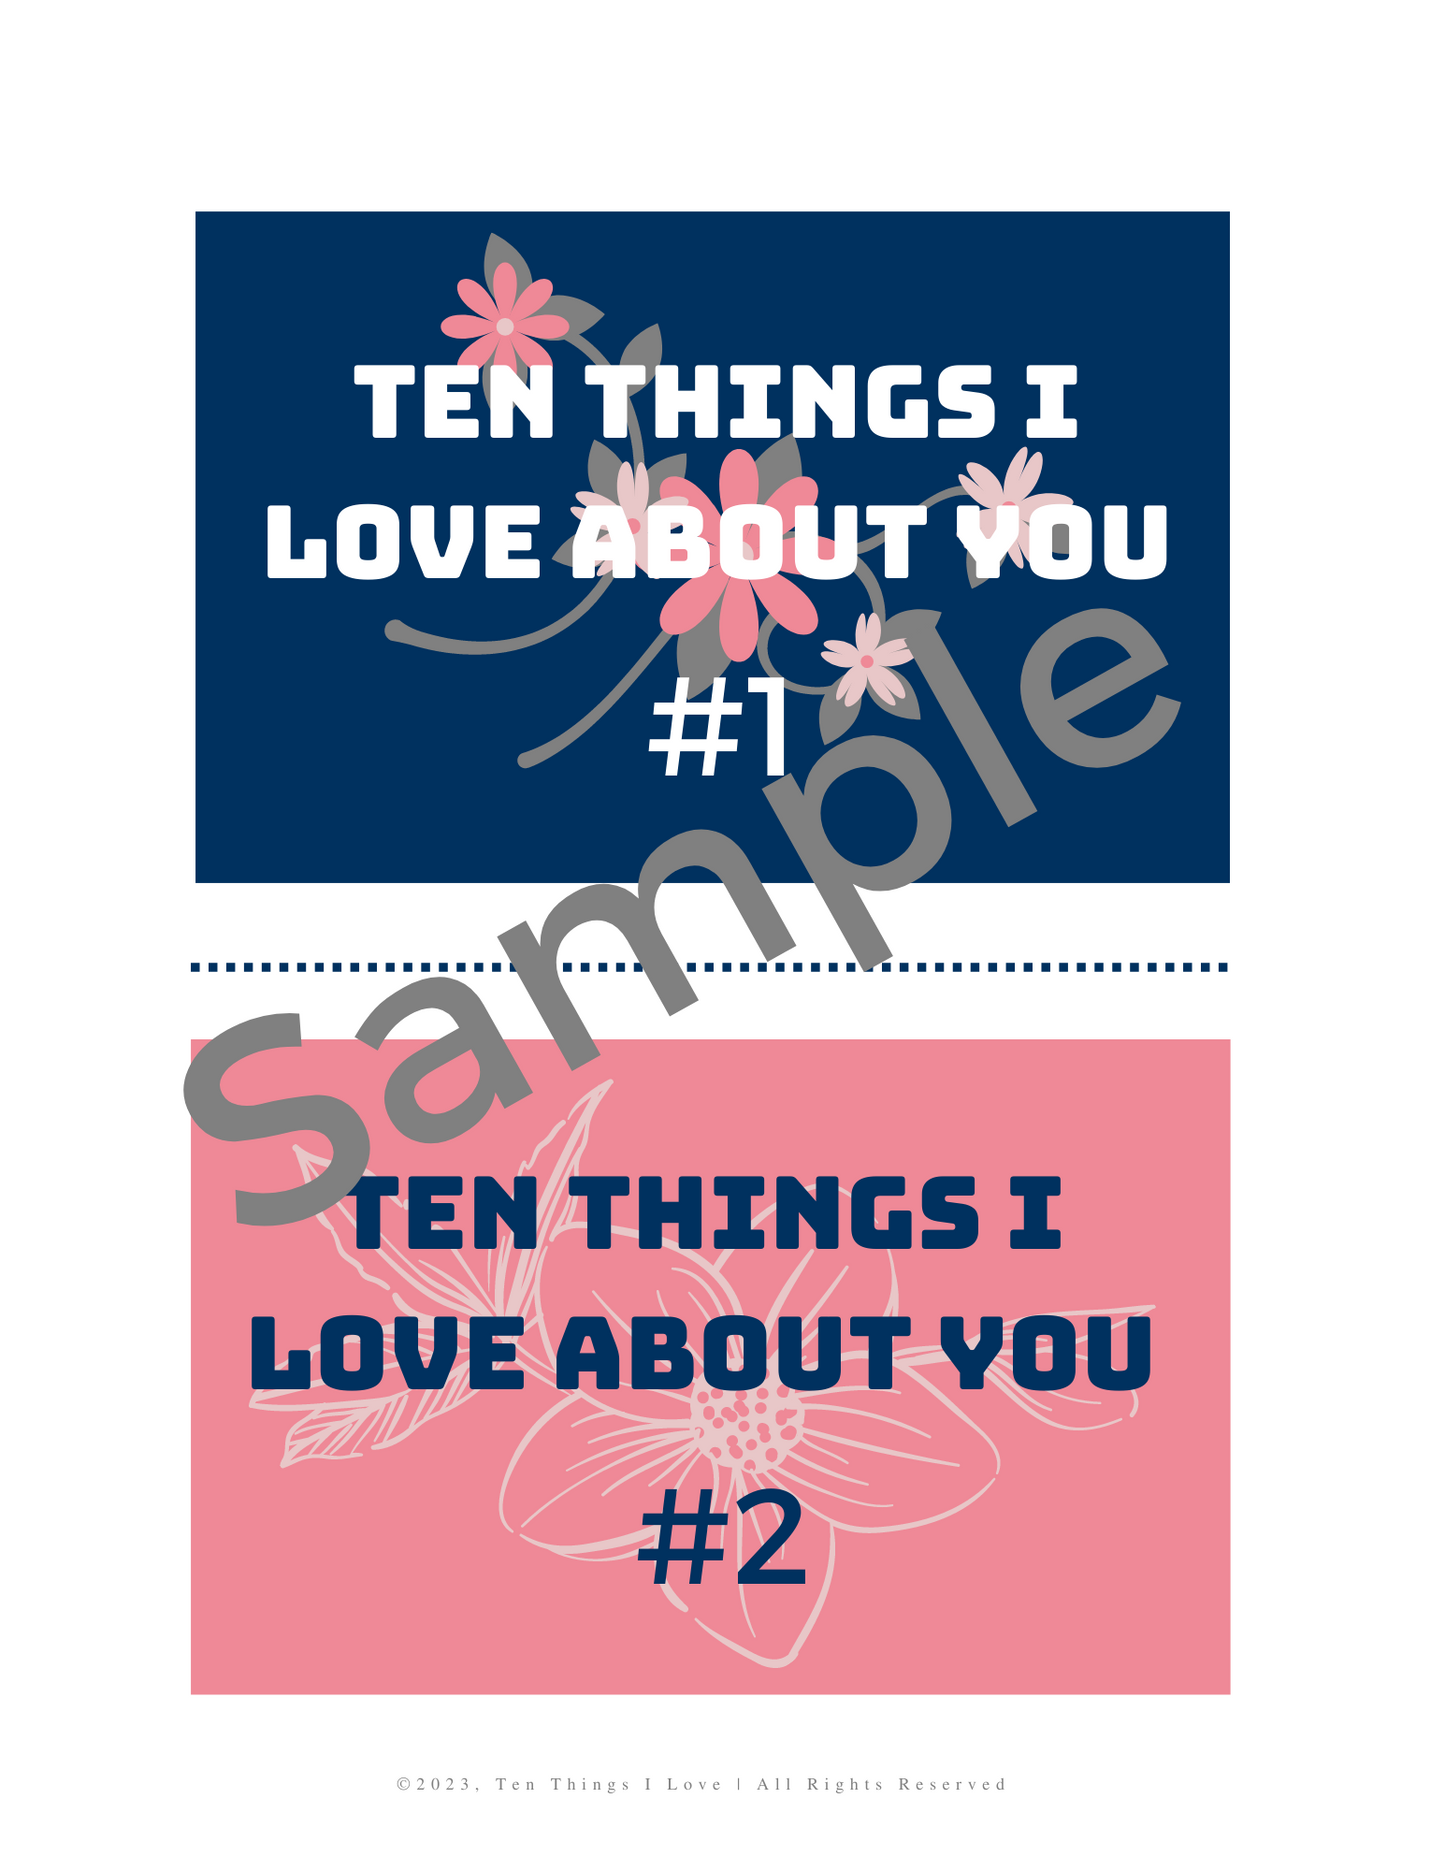 Ten Things I Love About You Printable Cards - Navy and Pink